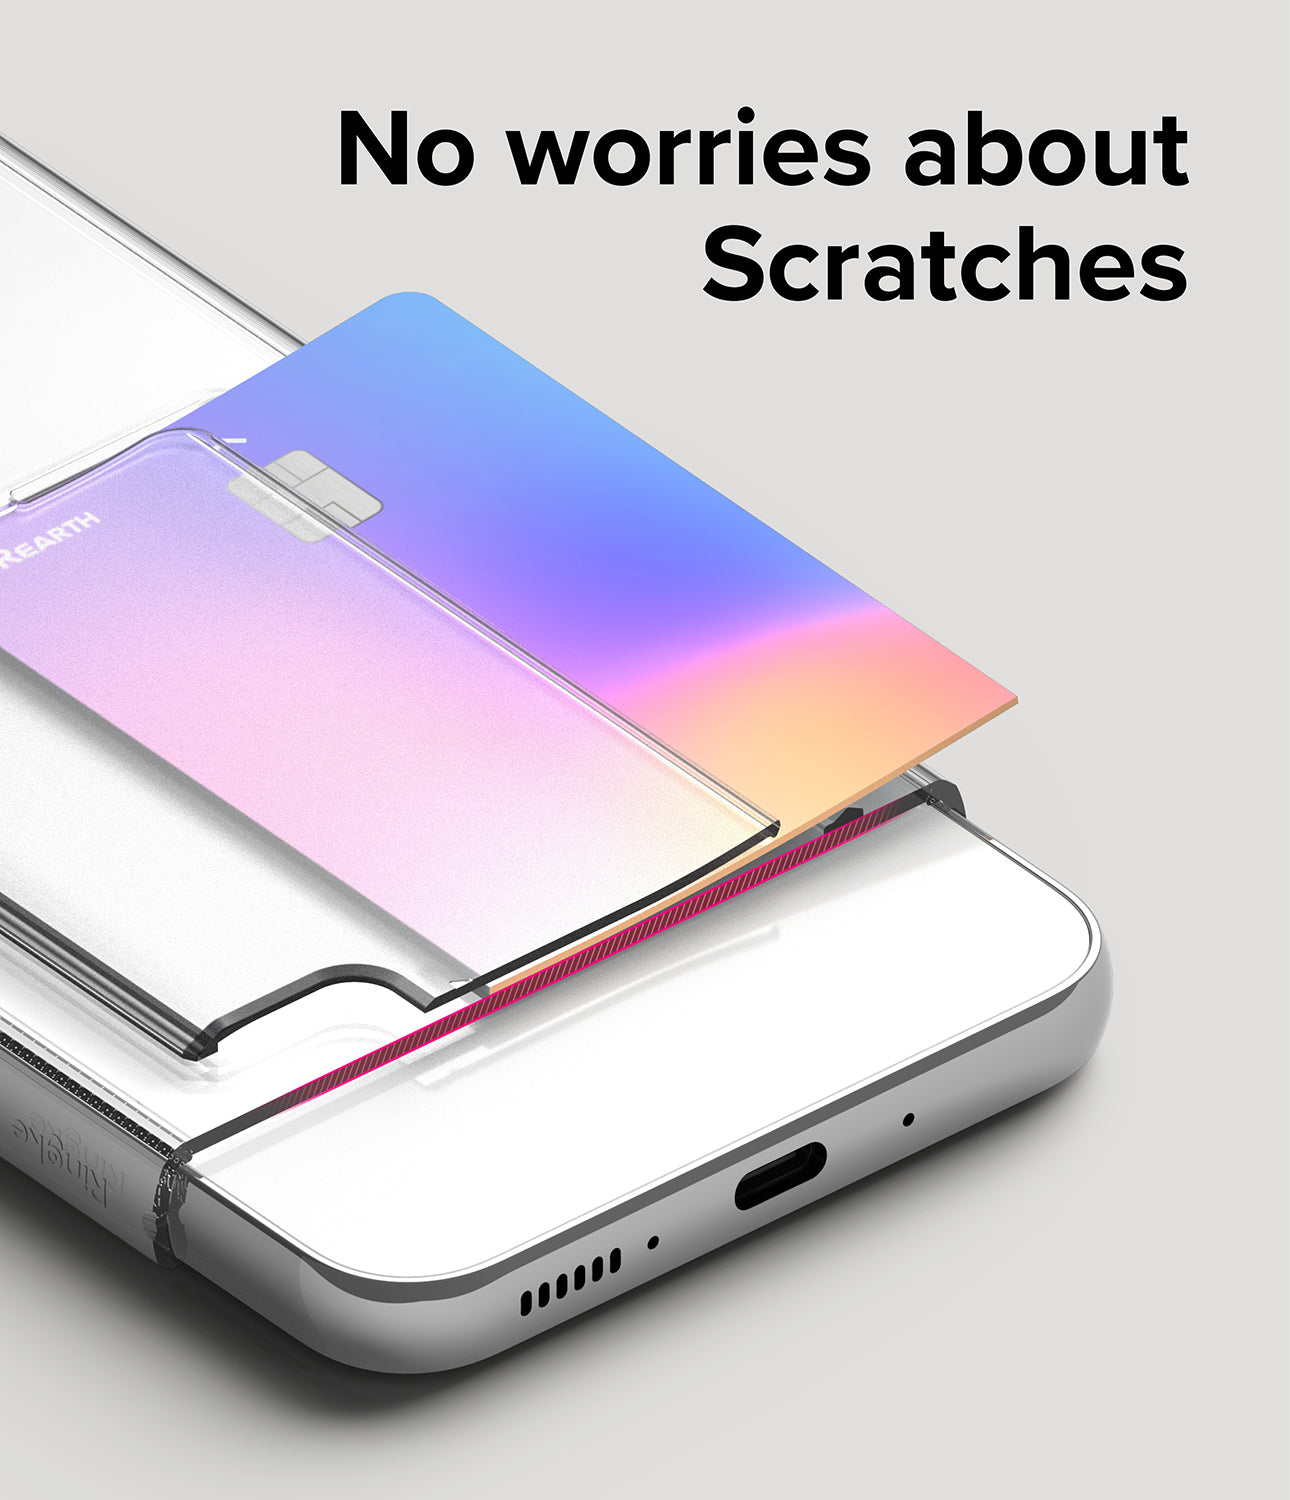 No worries about scratches